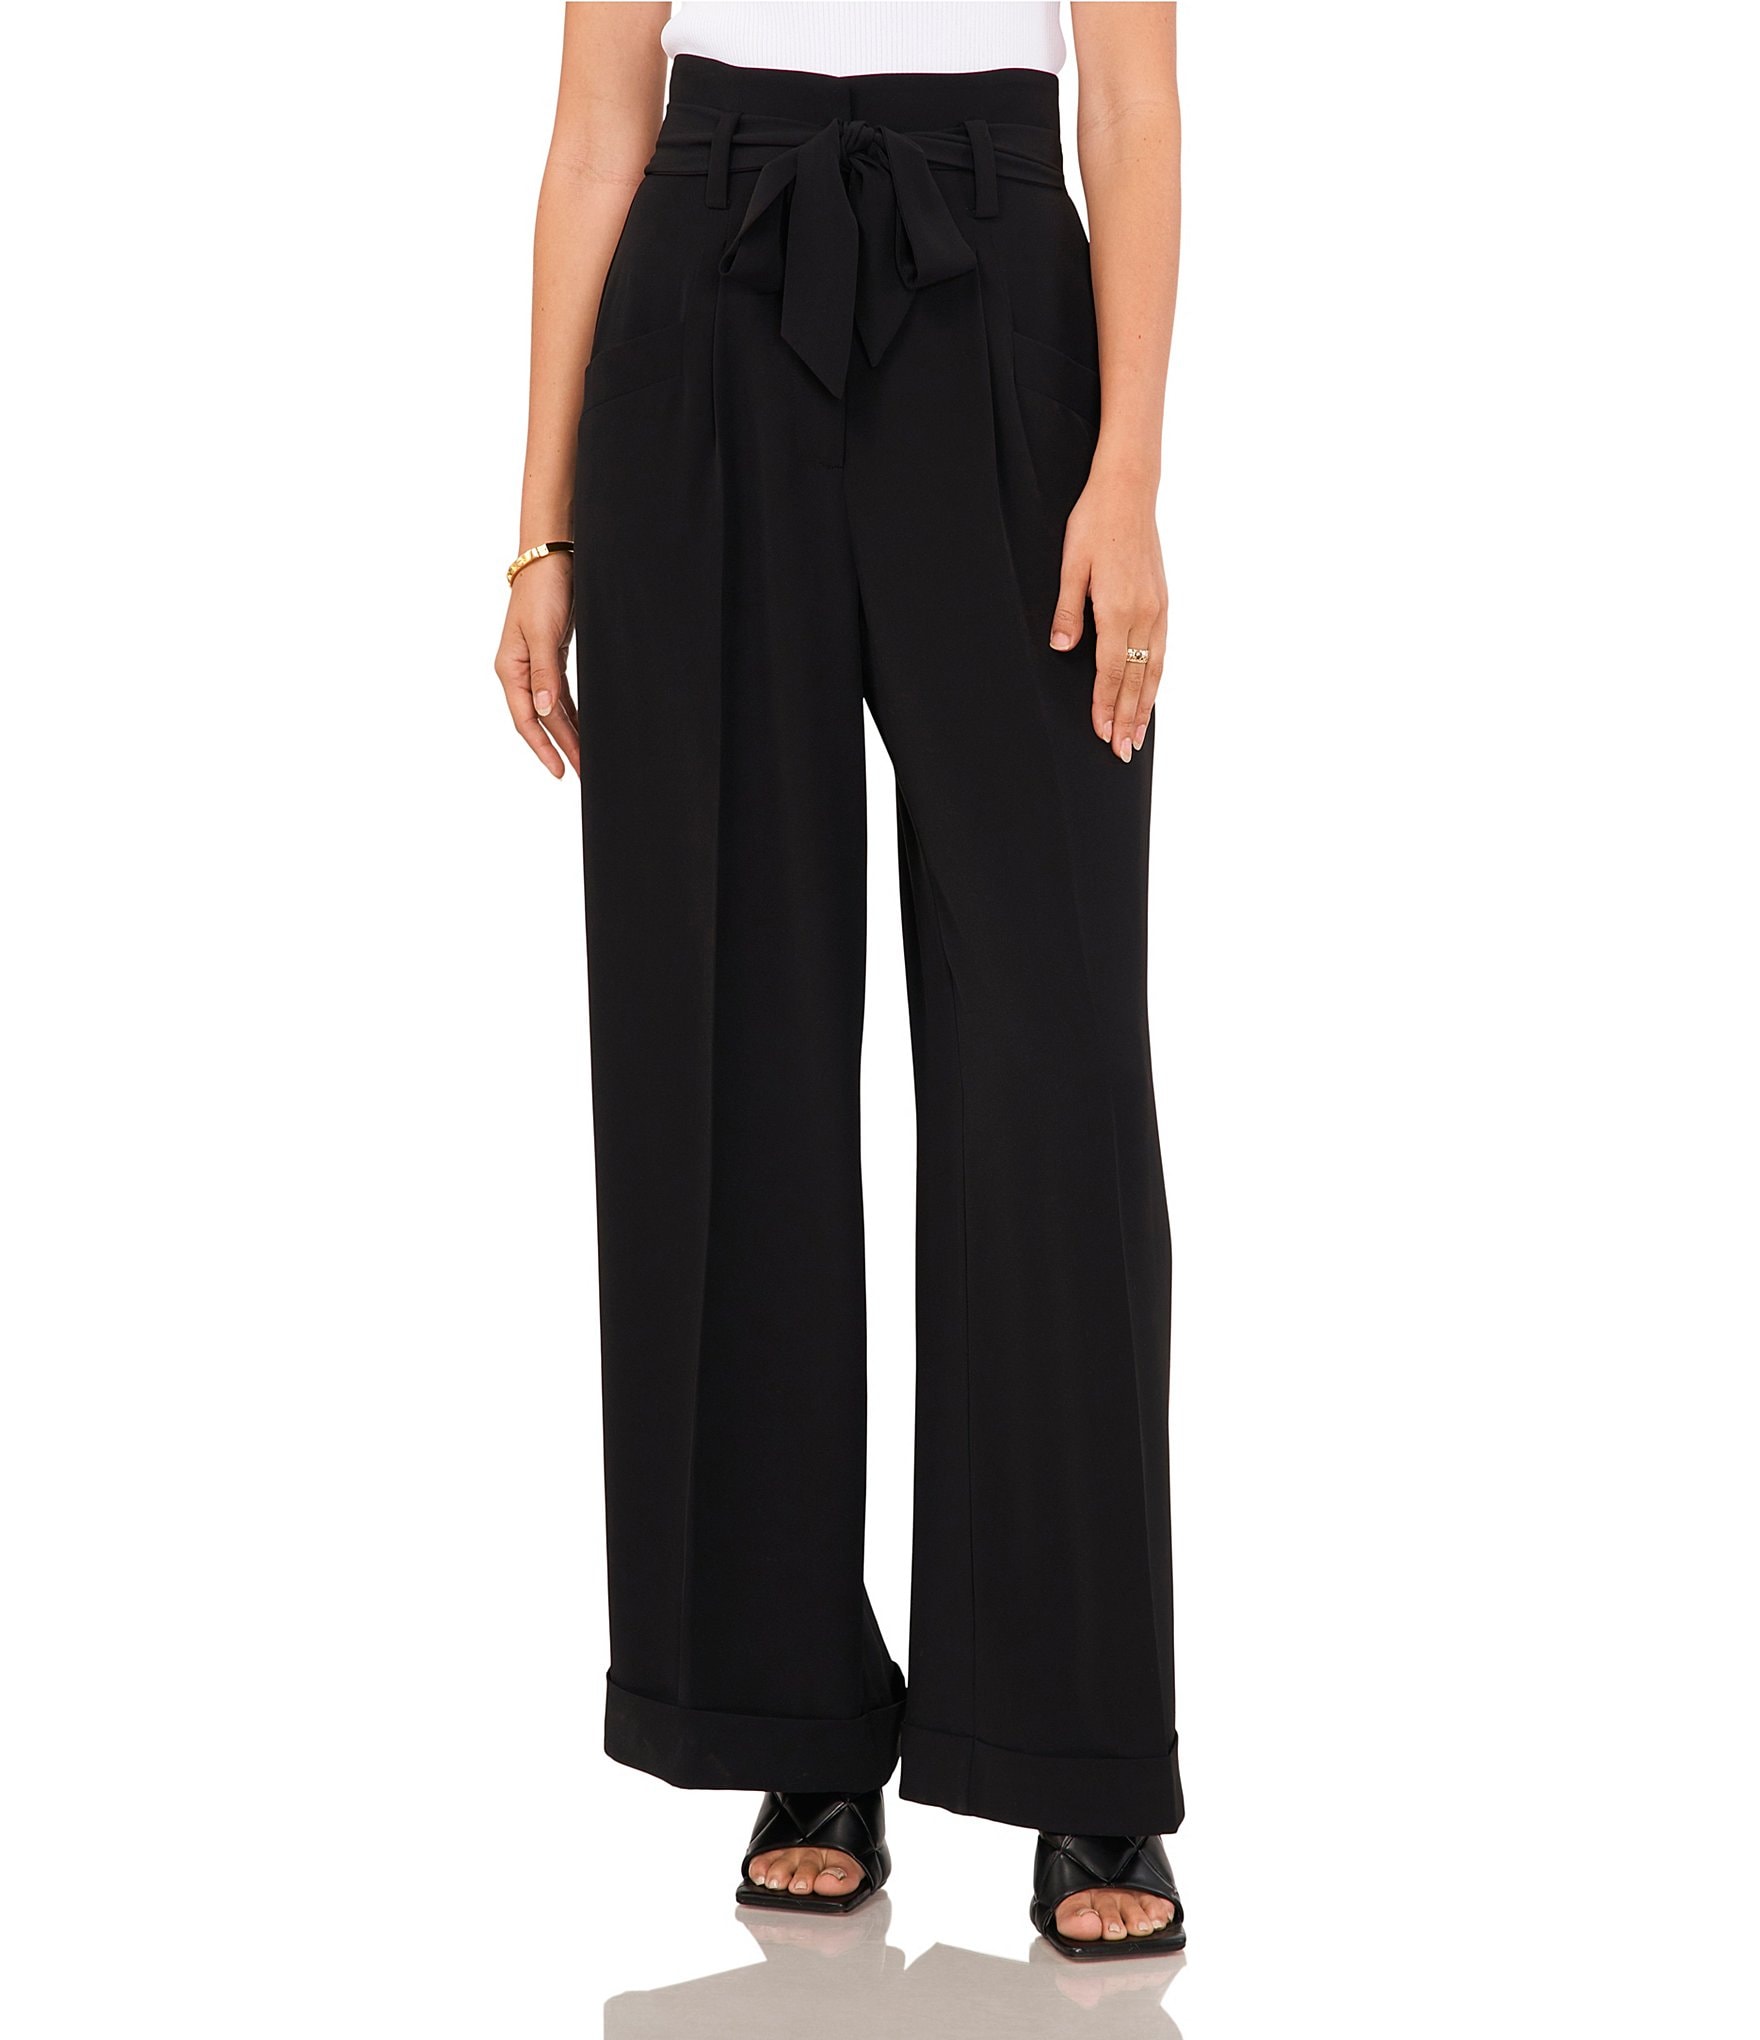 Vince Camuto Wide Leg Trousers with Tie Belt at Waist | Dillard's